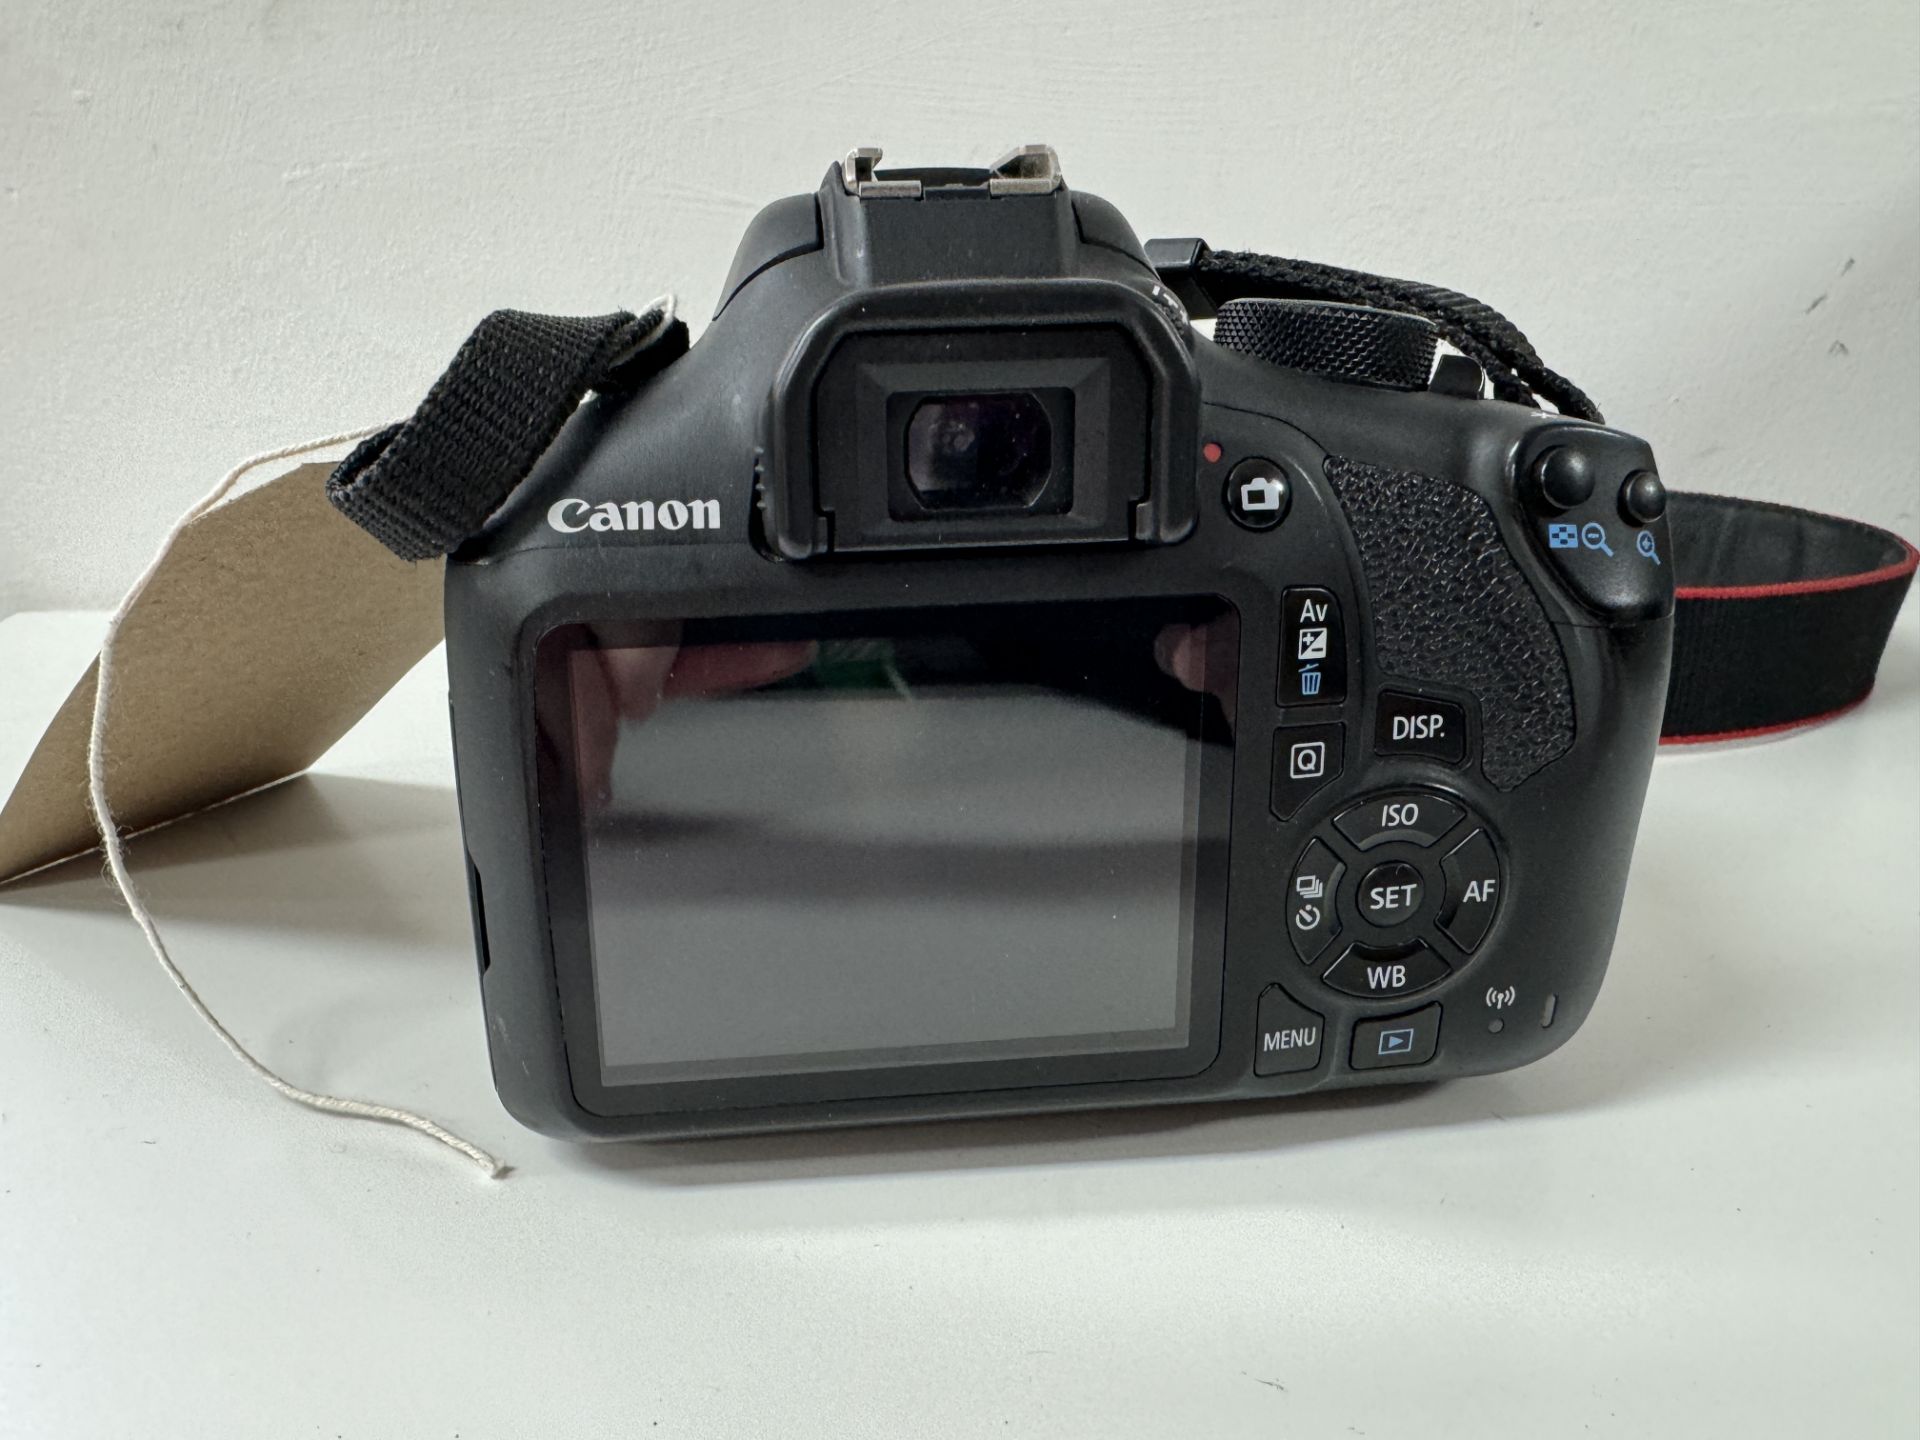 Canon DS12662 DSLR Camera, Serial Number 123072035524 with Canon Zoom Lens EF-S 18-55mm 1:3.5-5.6 - Image 2 of 4